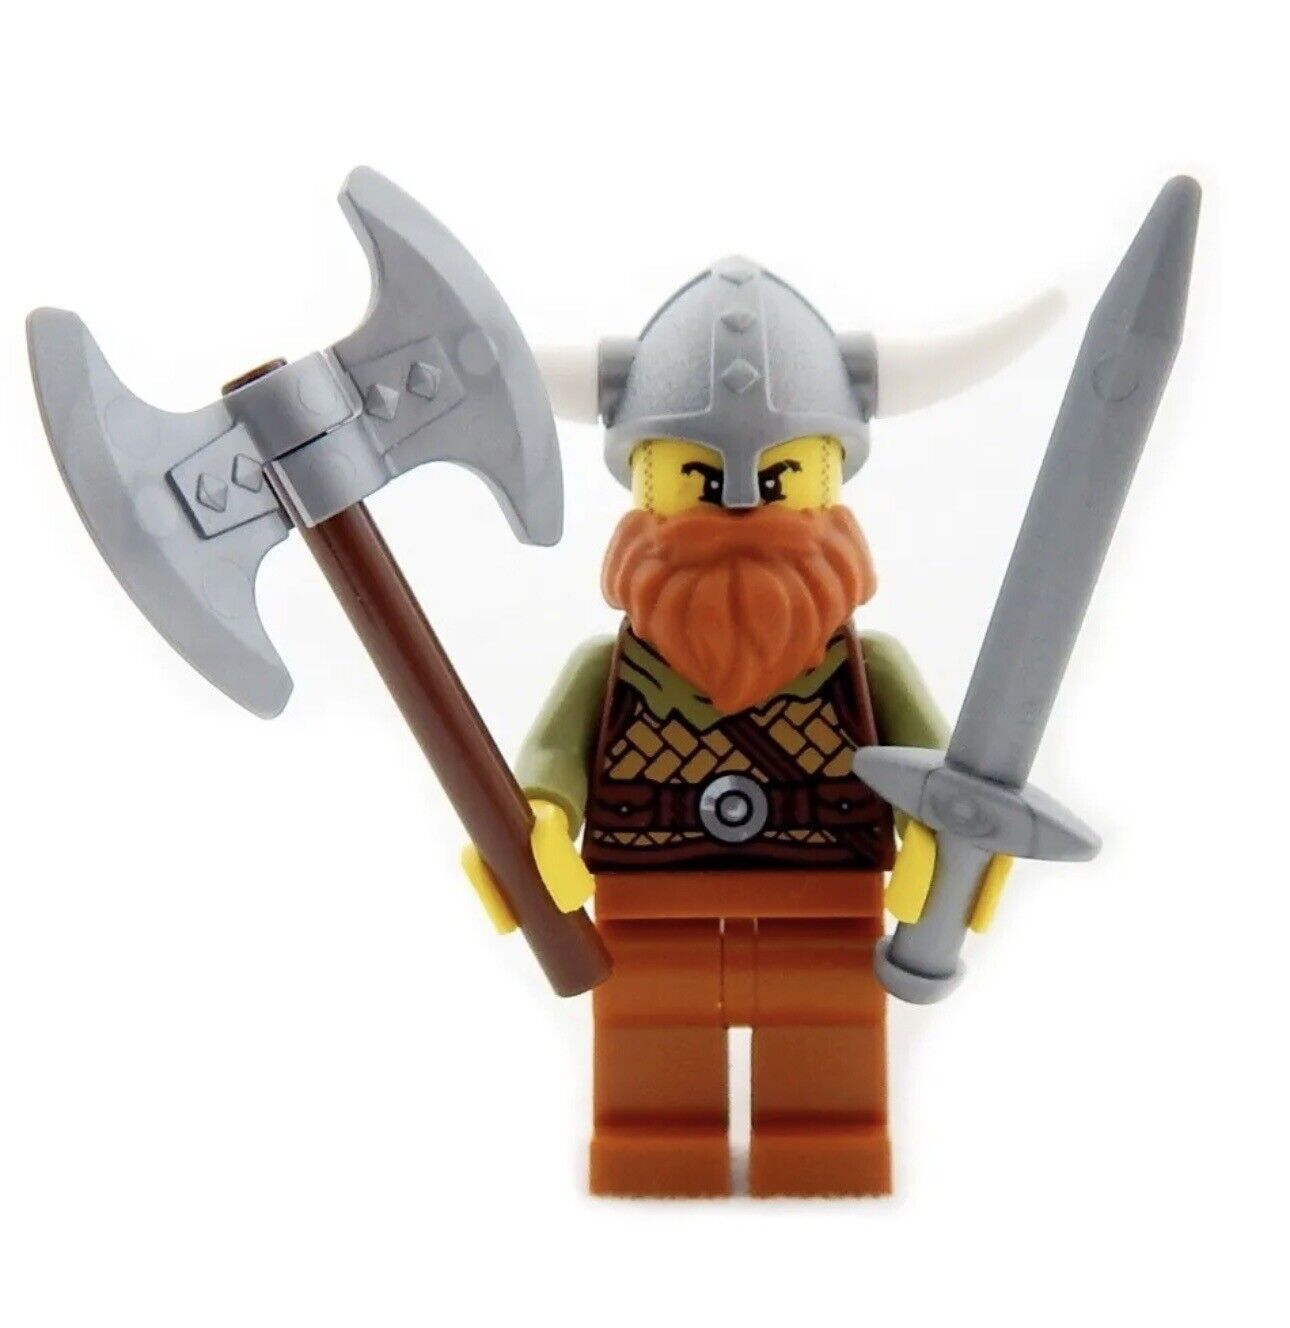 Lego Viking Warrior Mini Figure With Flat Silver Greatsword And Axe Weapon